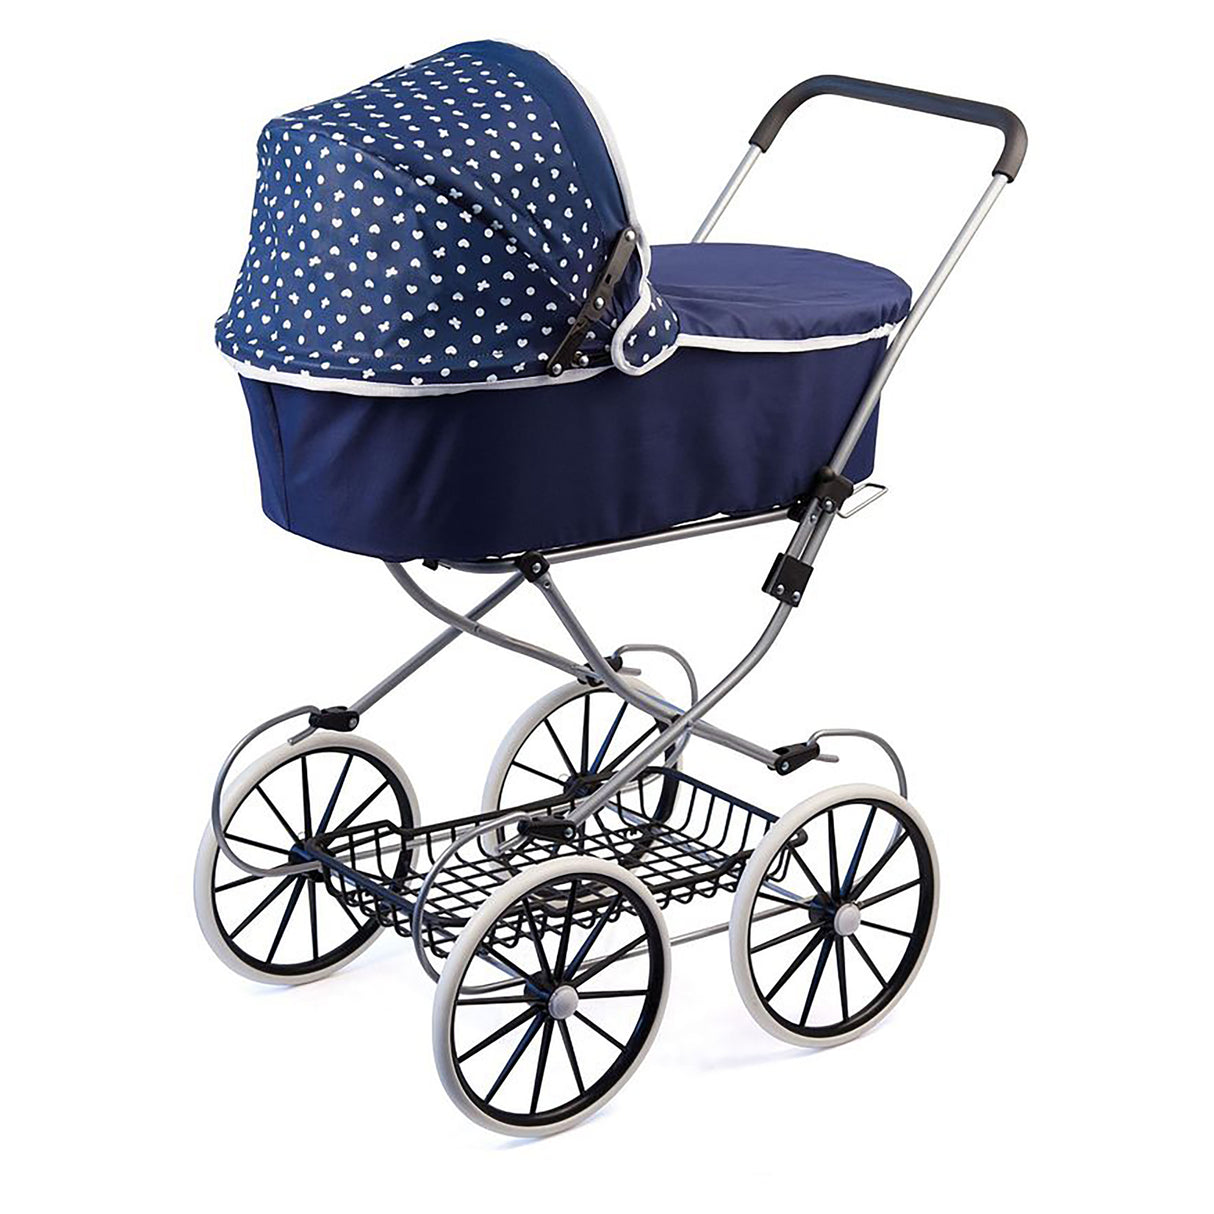 Bayer Classic Deluxe Pram Dark Blue with White Hearts